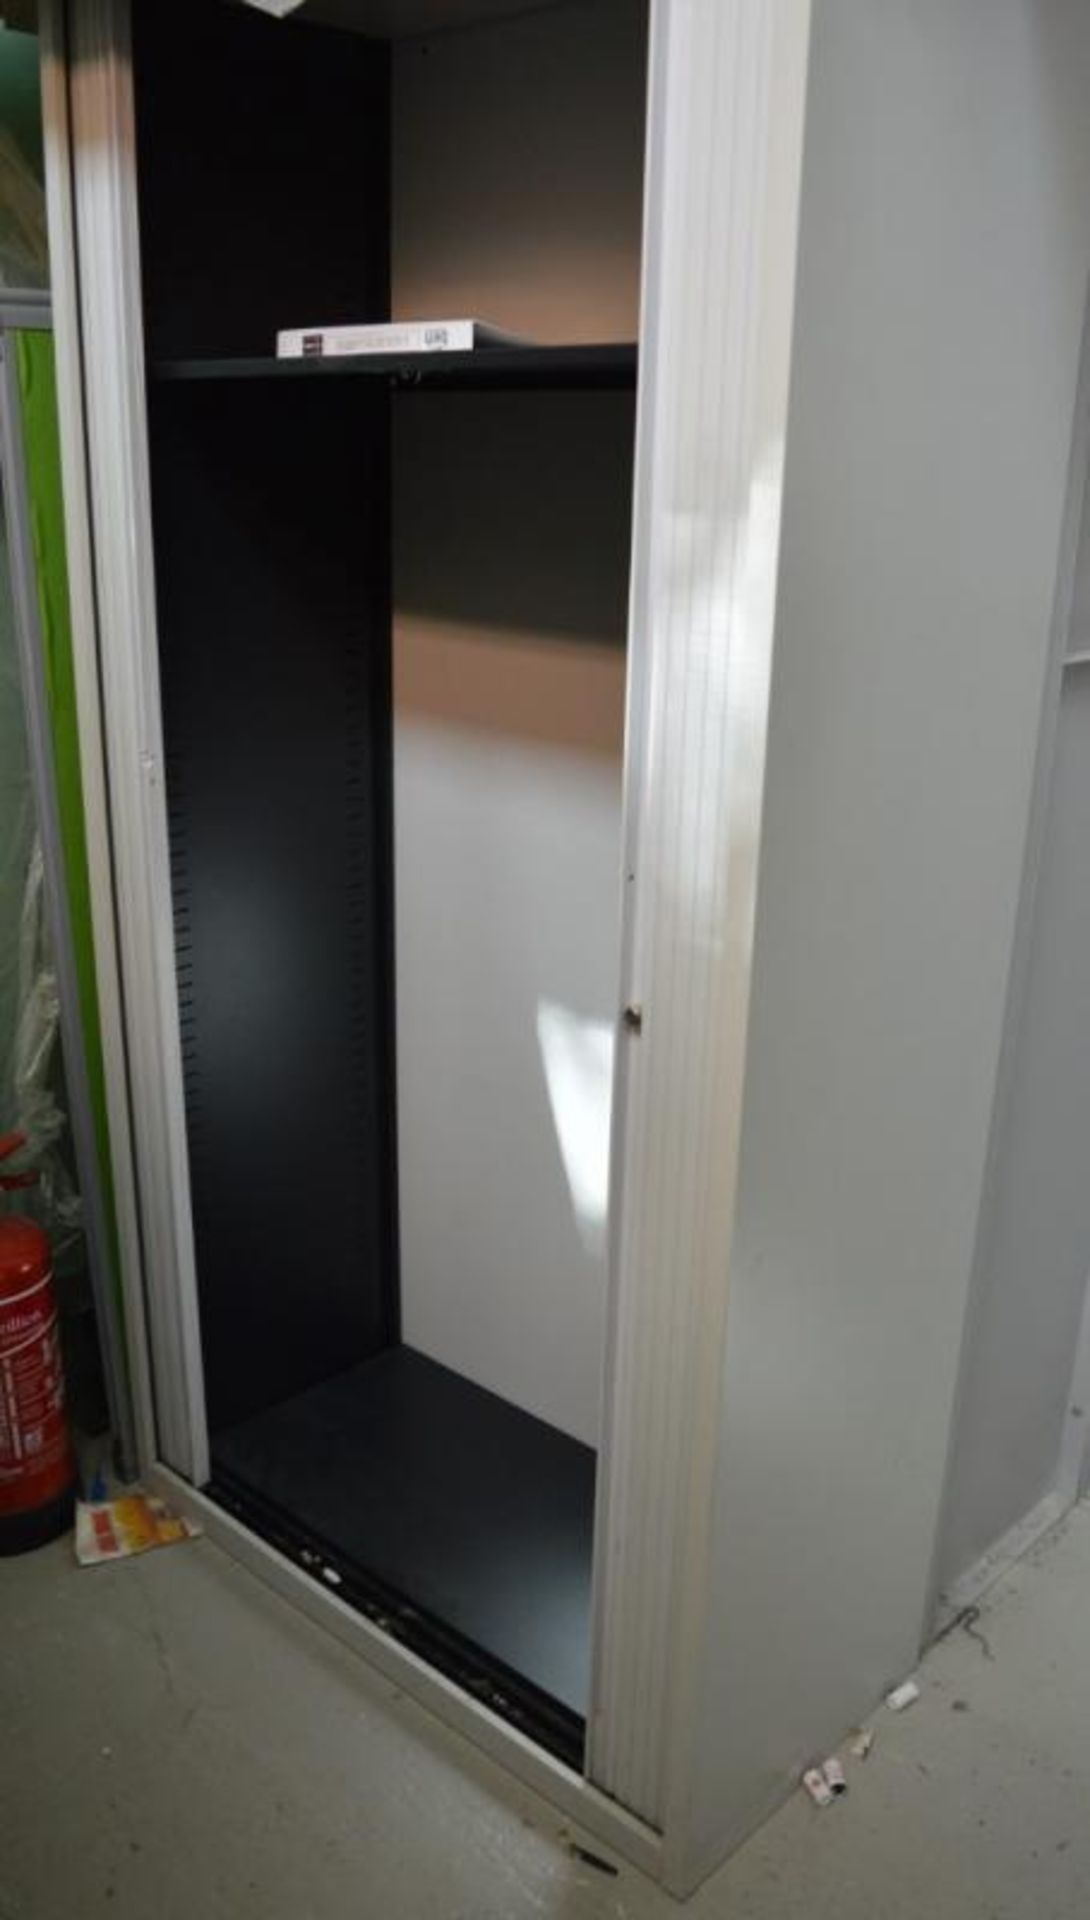 2 x Upright Office Storage Cabinets With Sliding Doors and Internal Shelves - H193 x W100 x D47 - Image 4 of 5